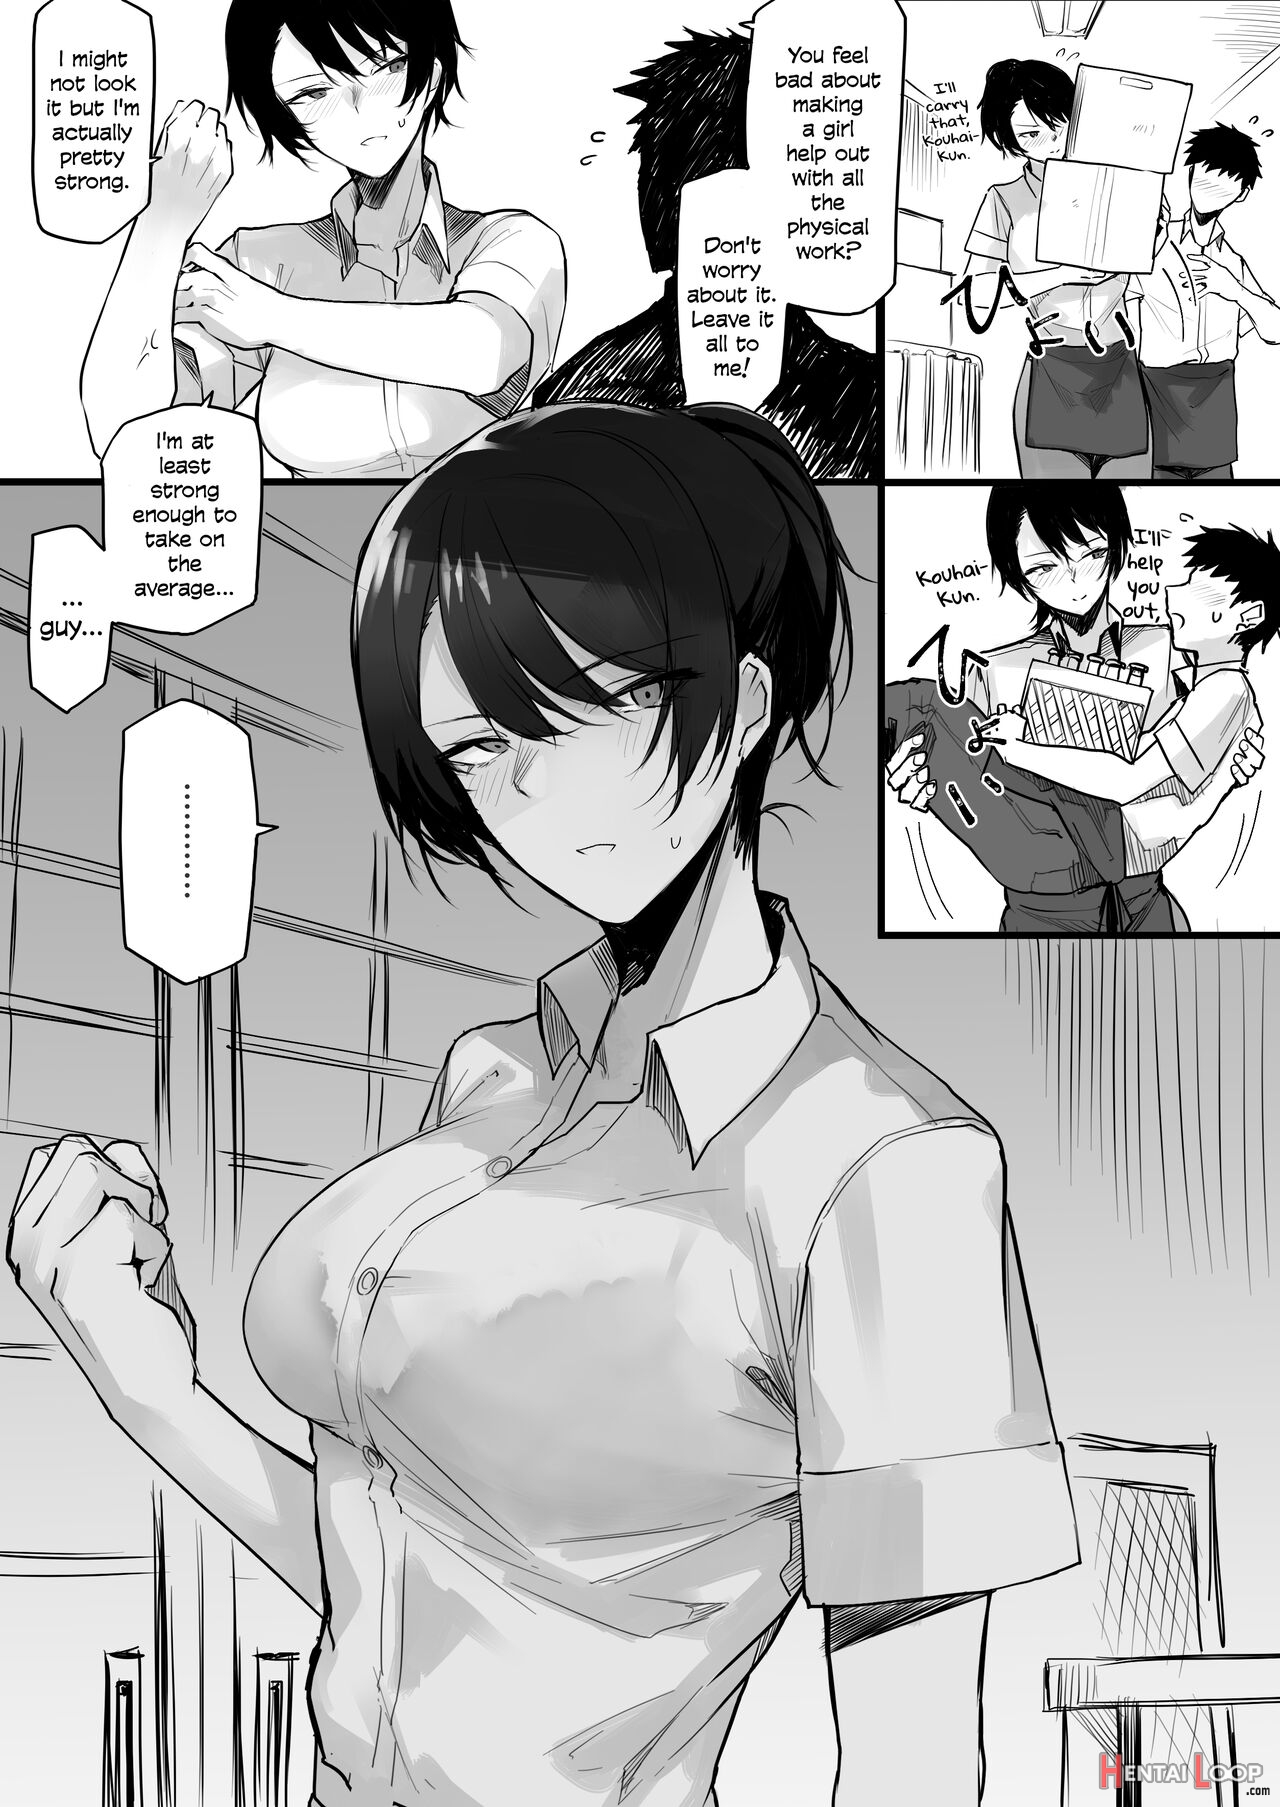 The Strong Onee-san Who Gave Into Temptation page 2